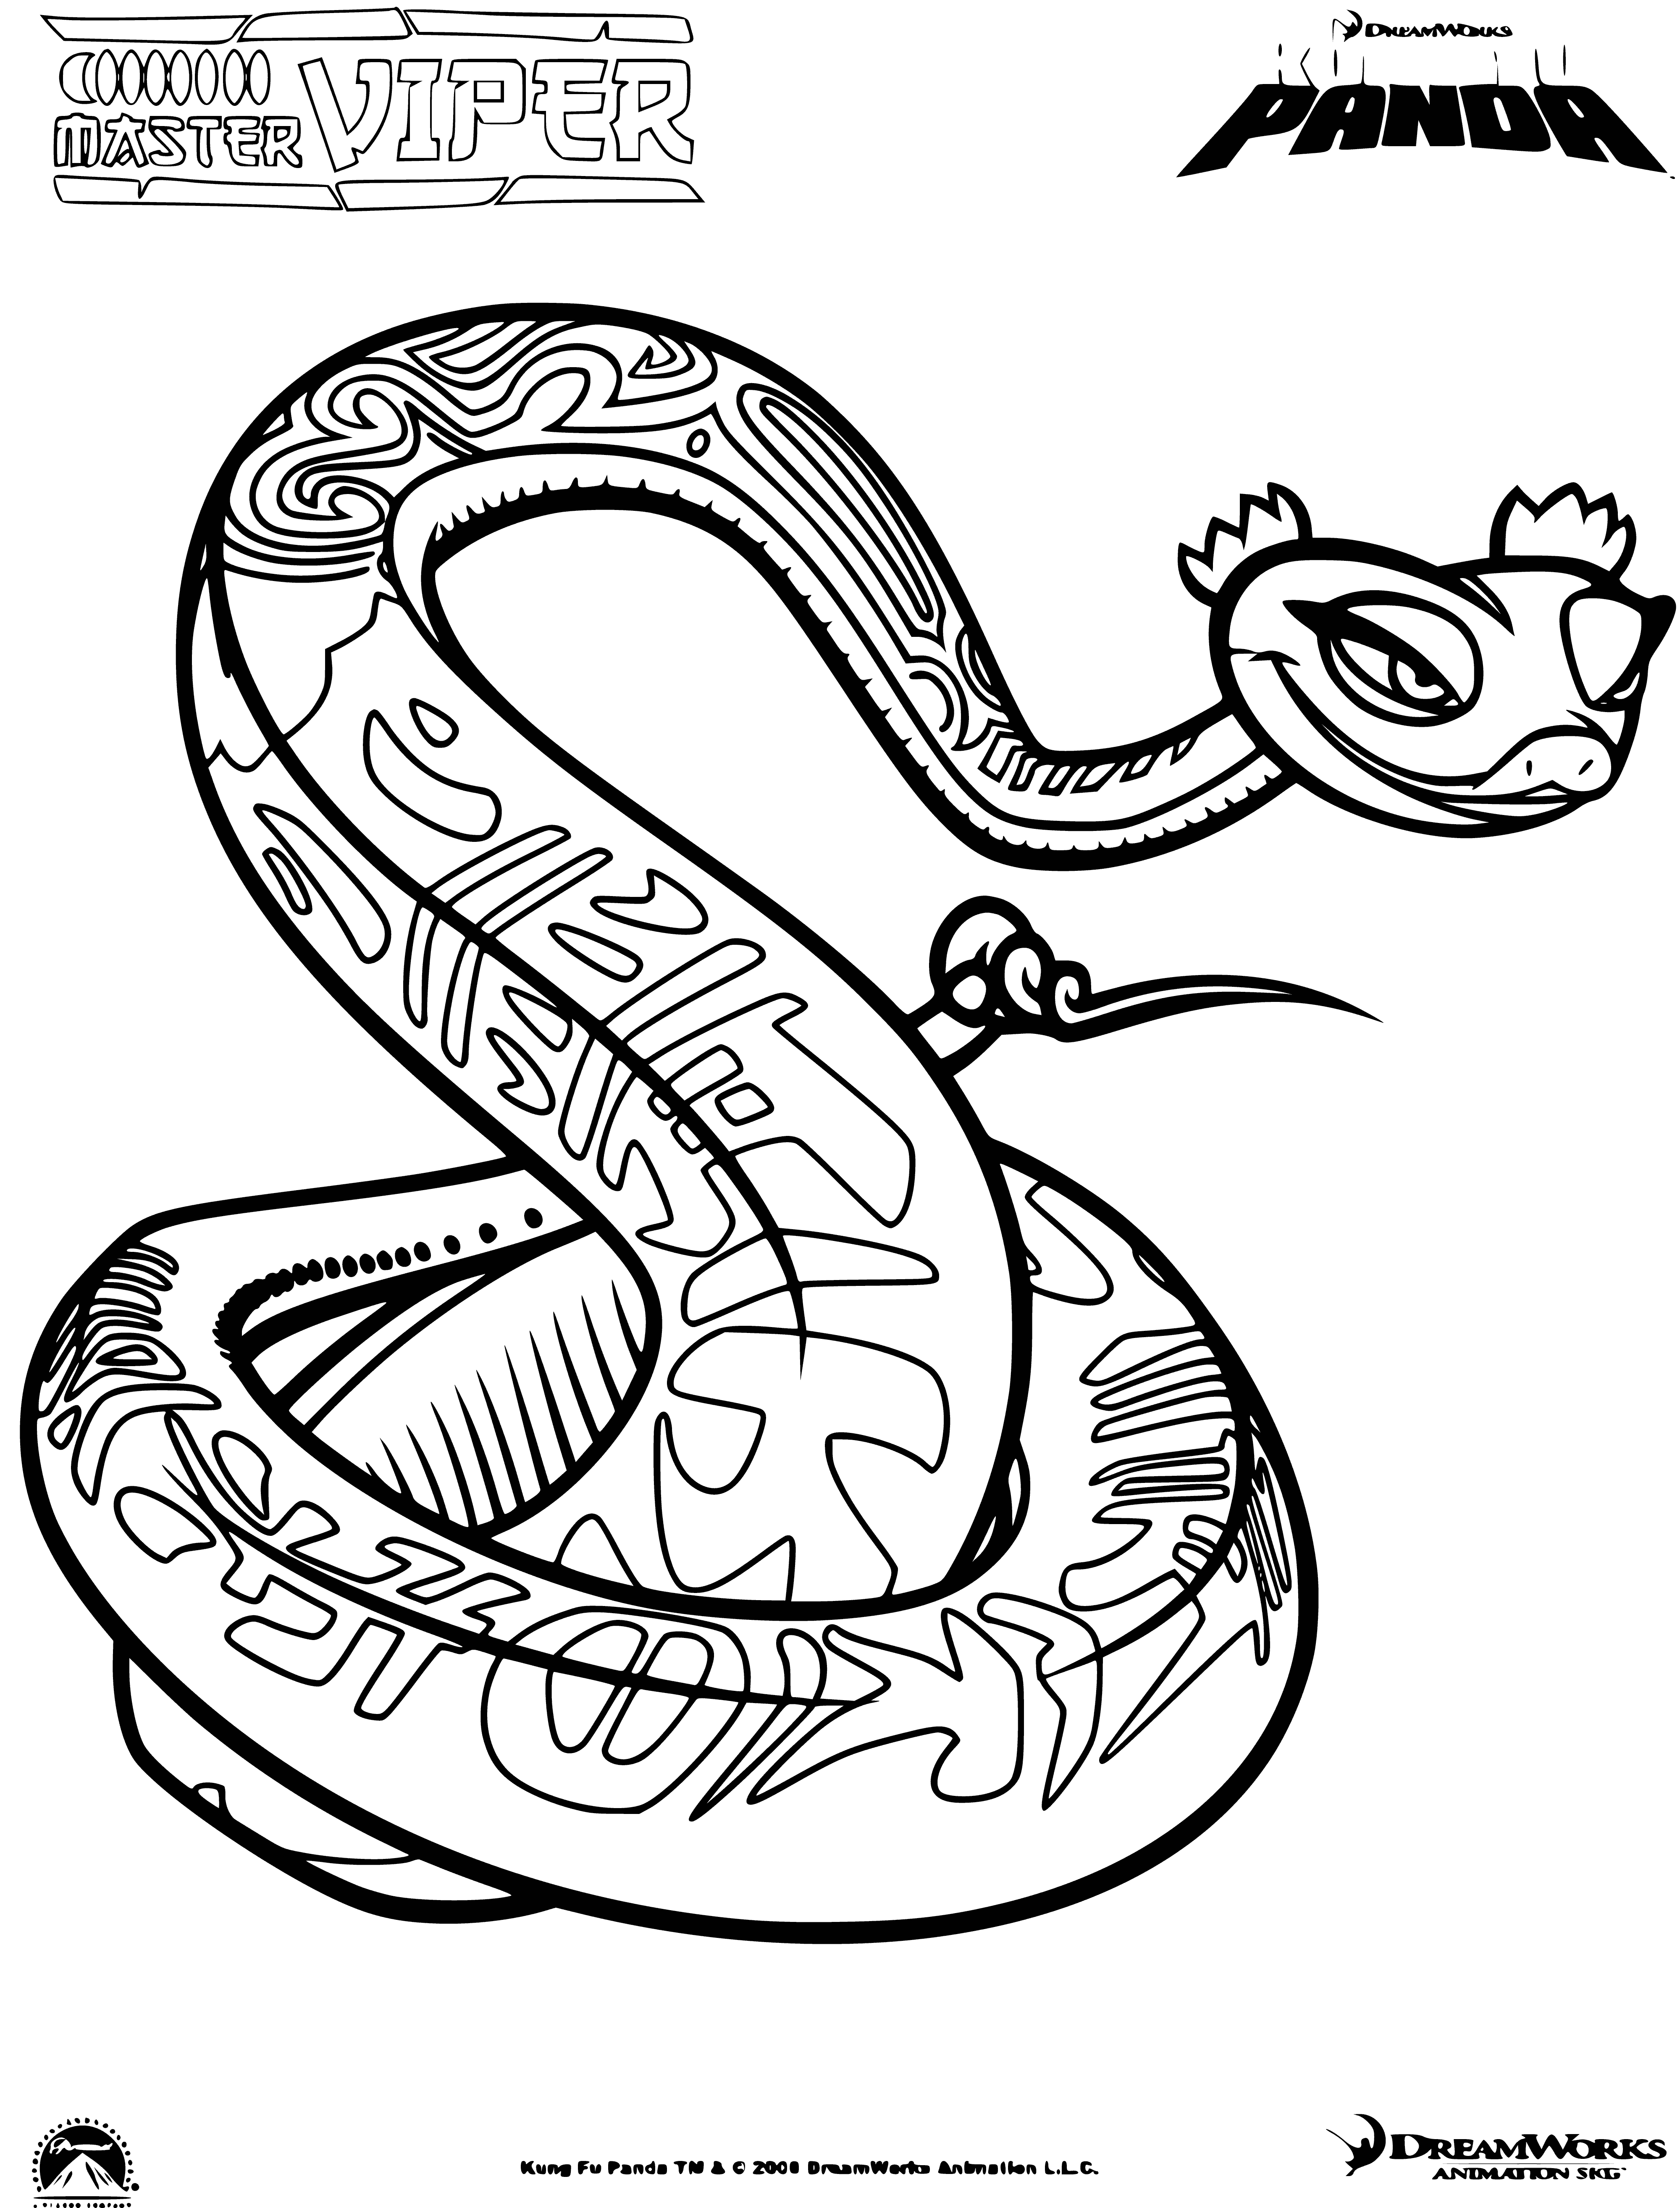 Snake Master coloring page